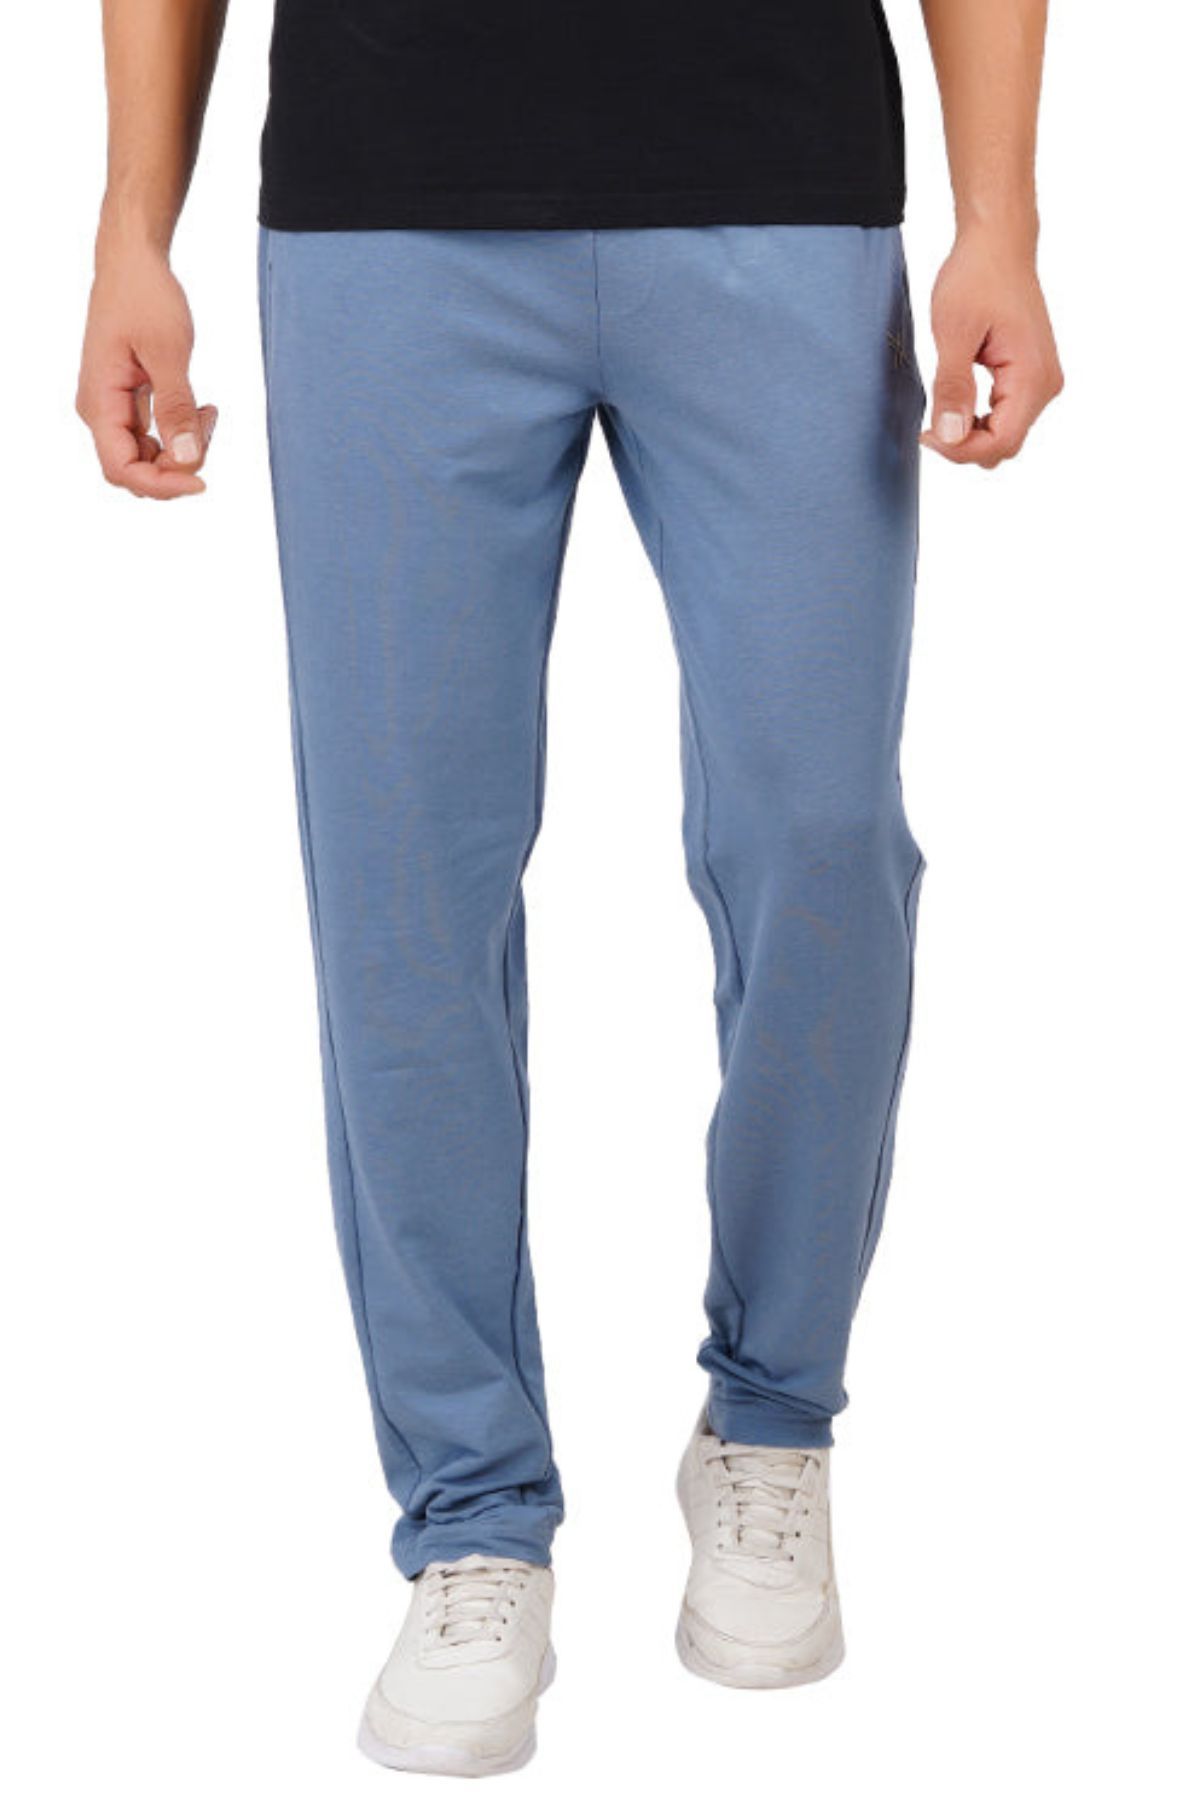 Buy Cotton Sky Blue Track pants for Women online in India - Cupidclothings  – Cupid Clothings